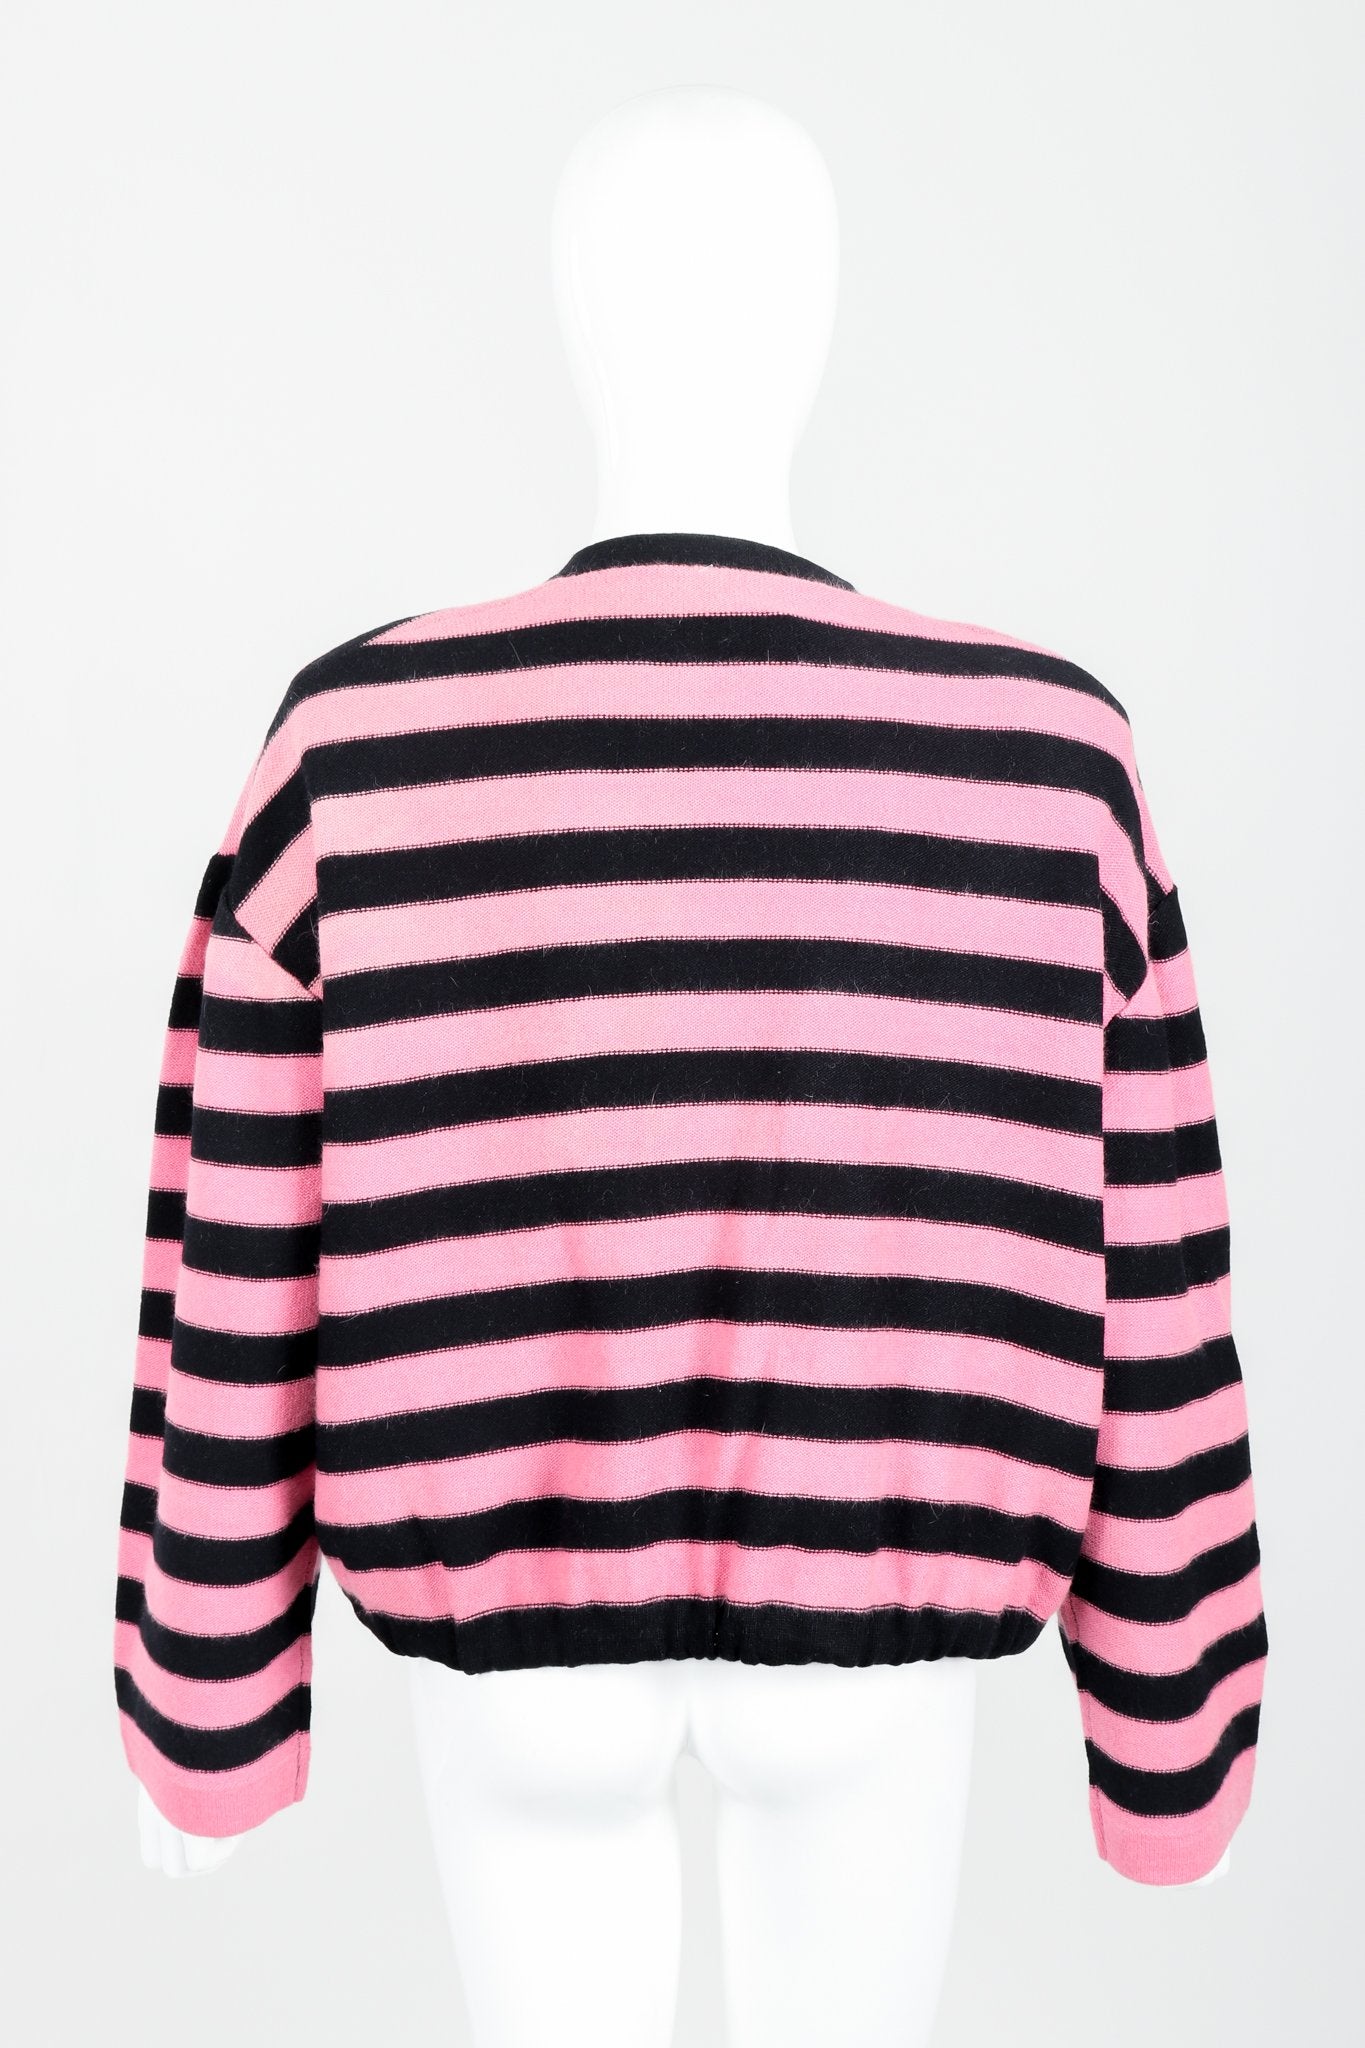 Vintage Sonia Rykiel Pink Stripe Knit Boxy Cardigan on Mannequin Back at Recess Los Angeles